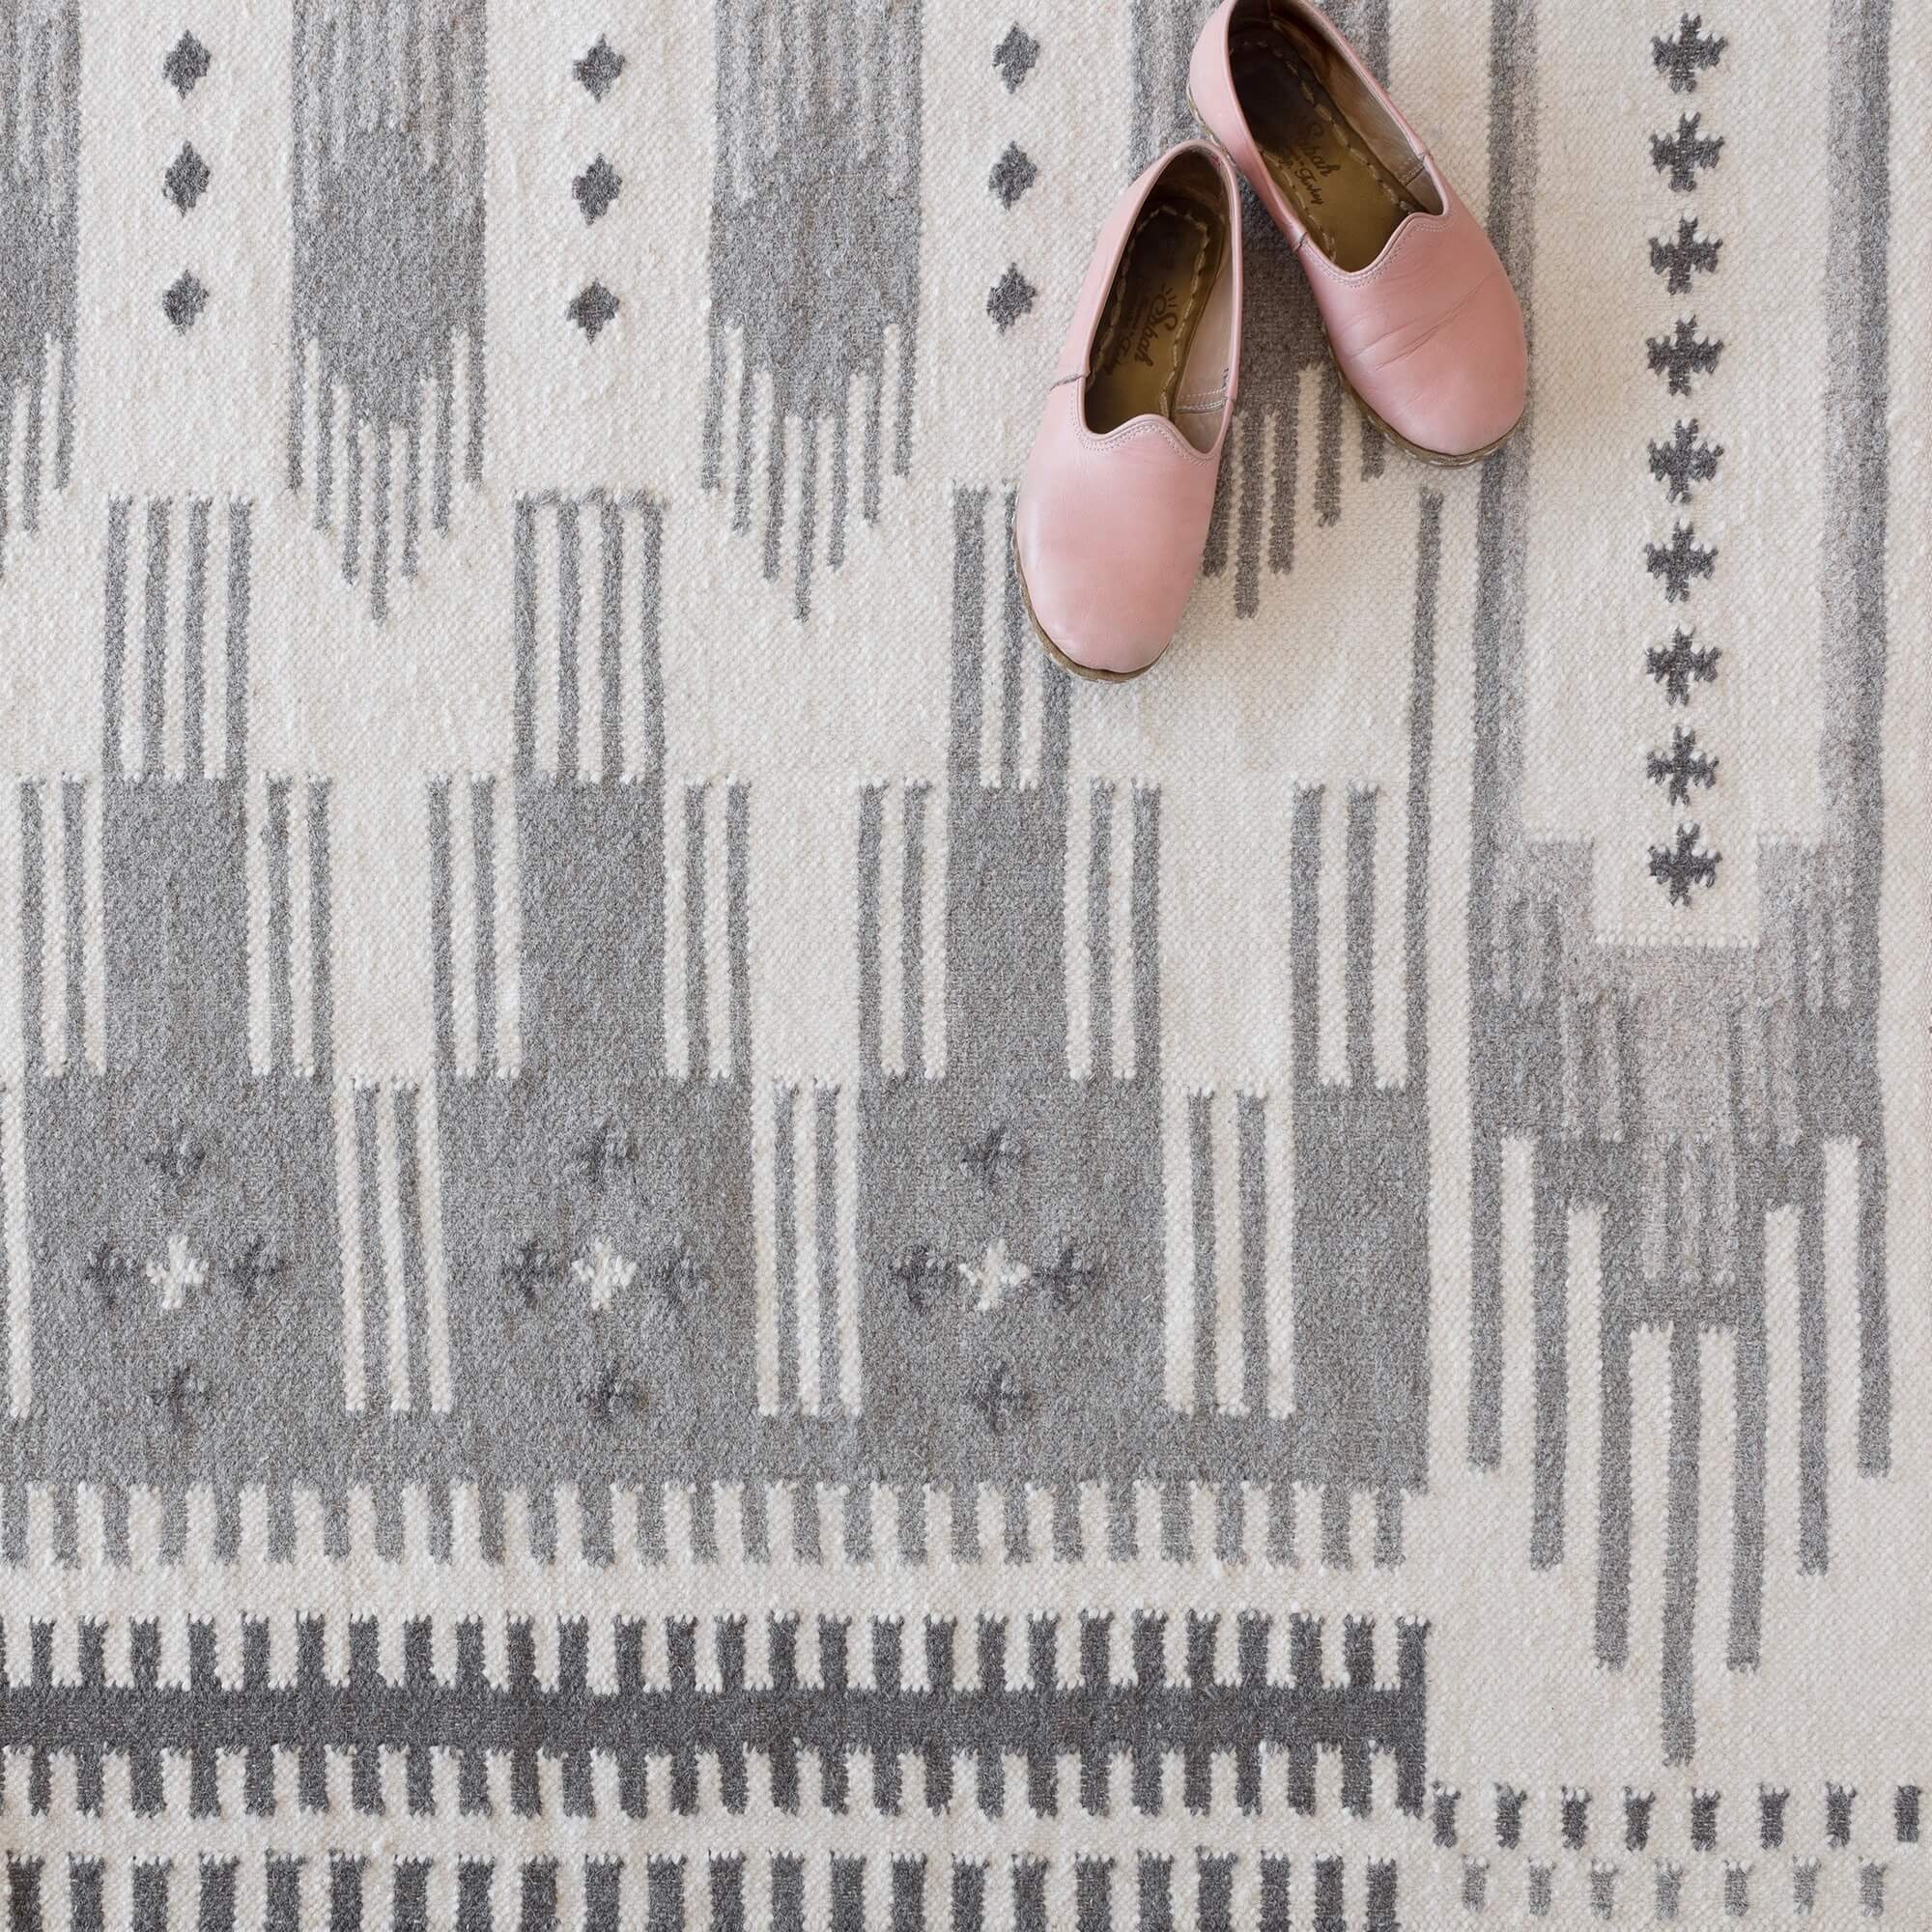 The Citizenry Asha Handwoven Area Rug | 10' x 14' | Grey - Image 5